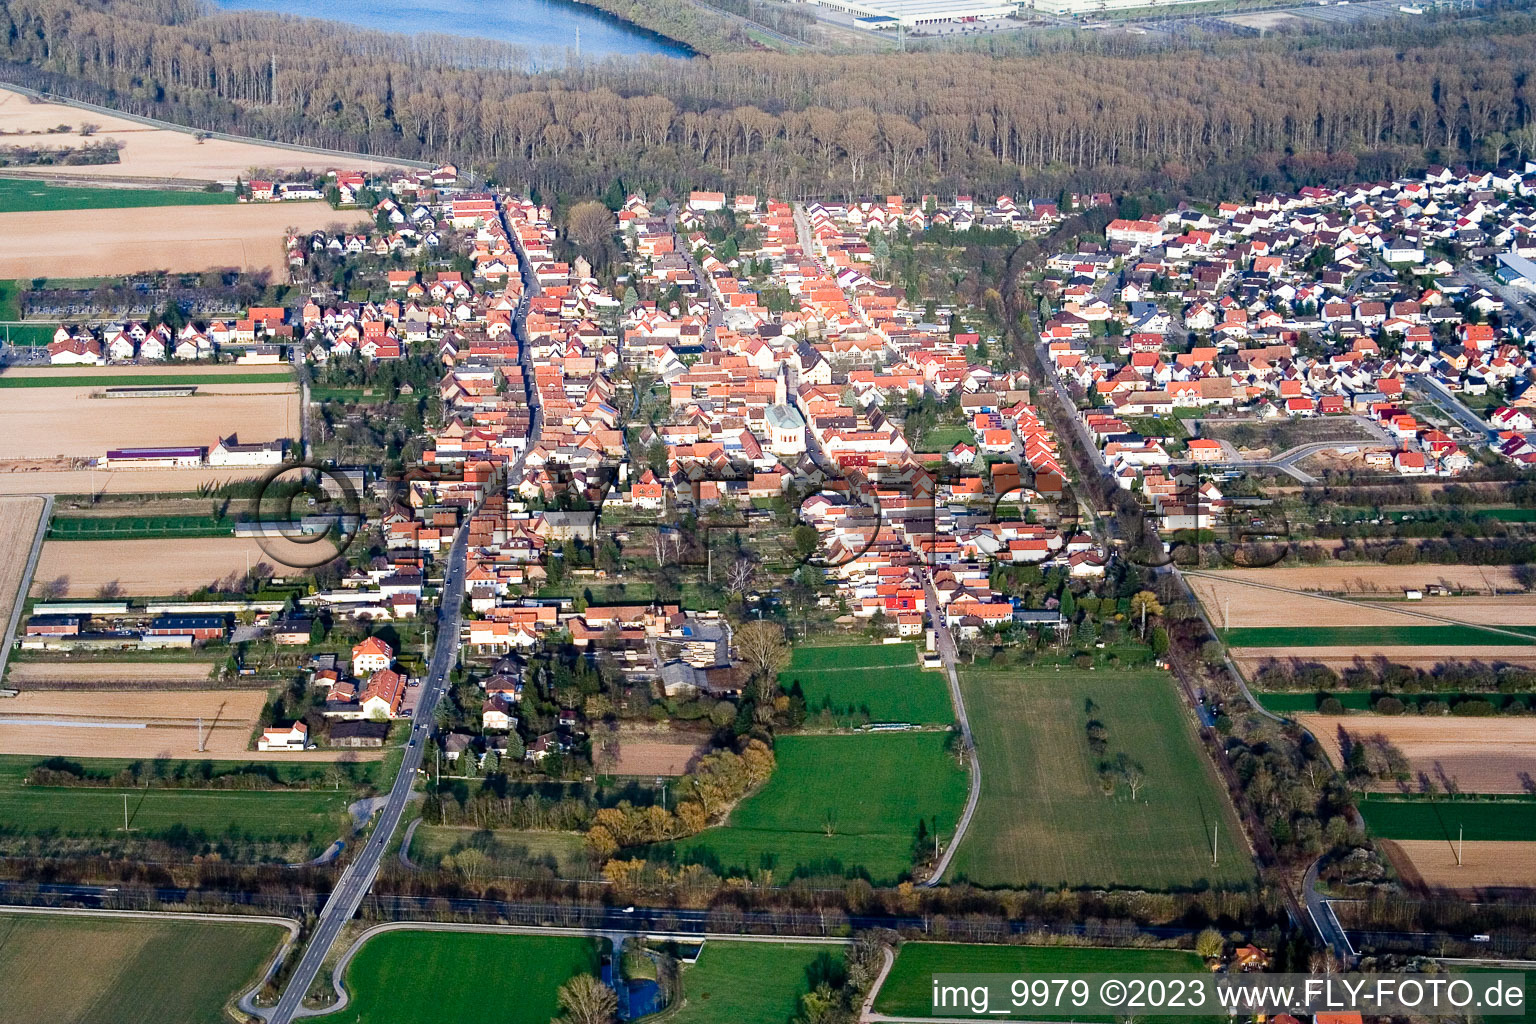 Lingenfeld in the state Rhineland-Palatinate, Germany seen from above